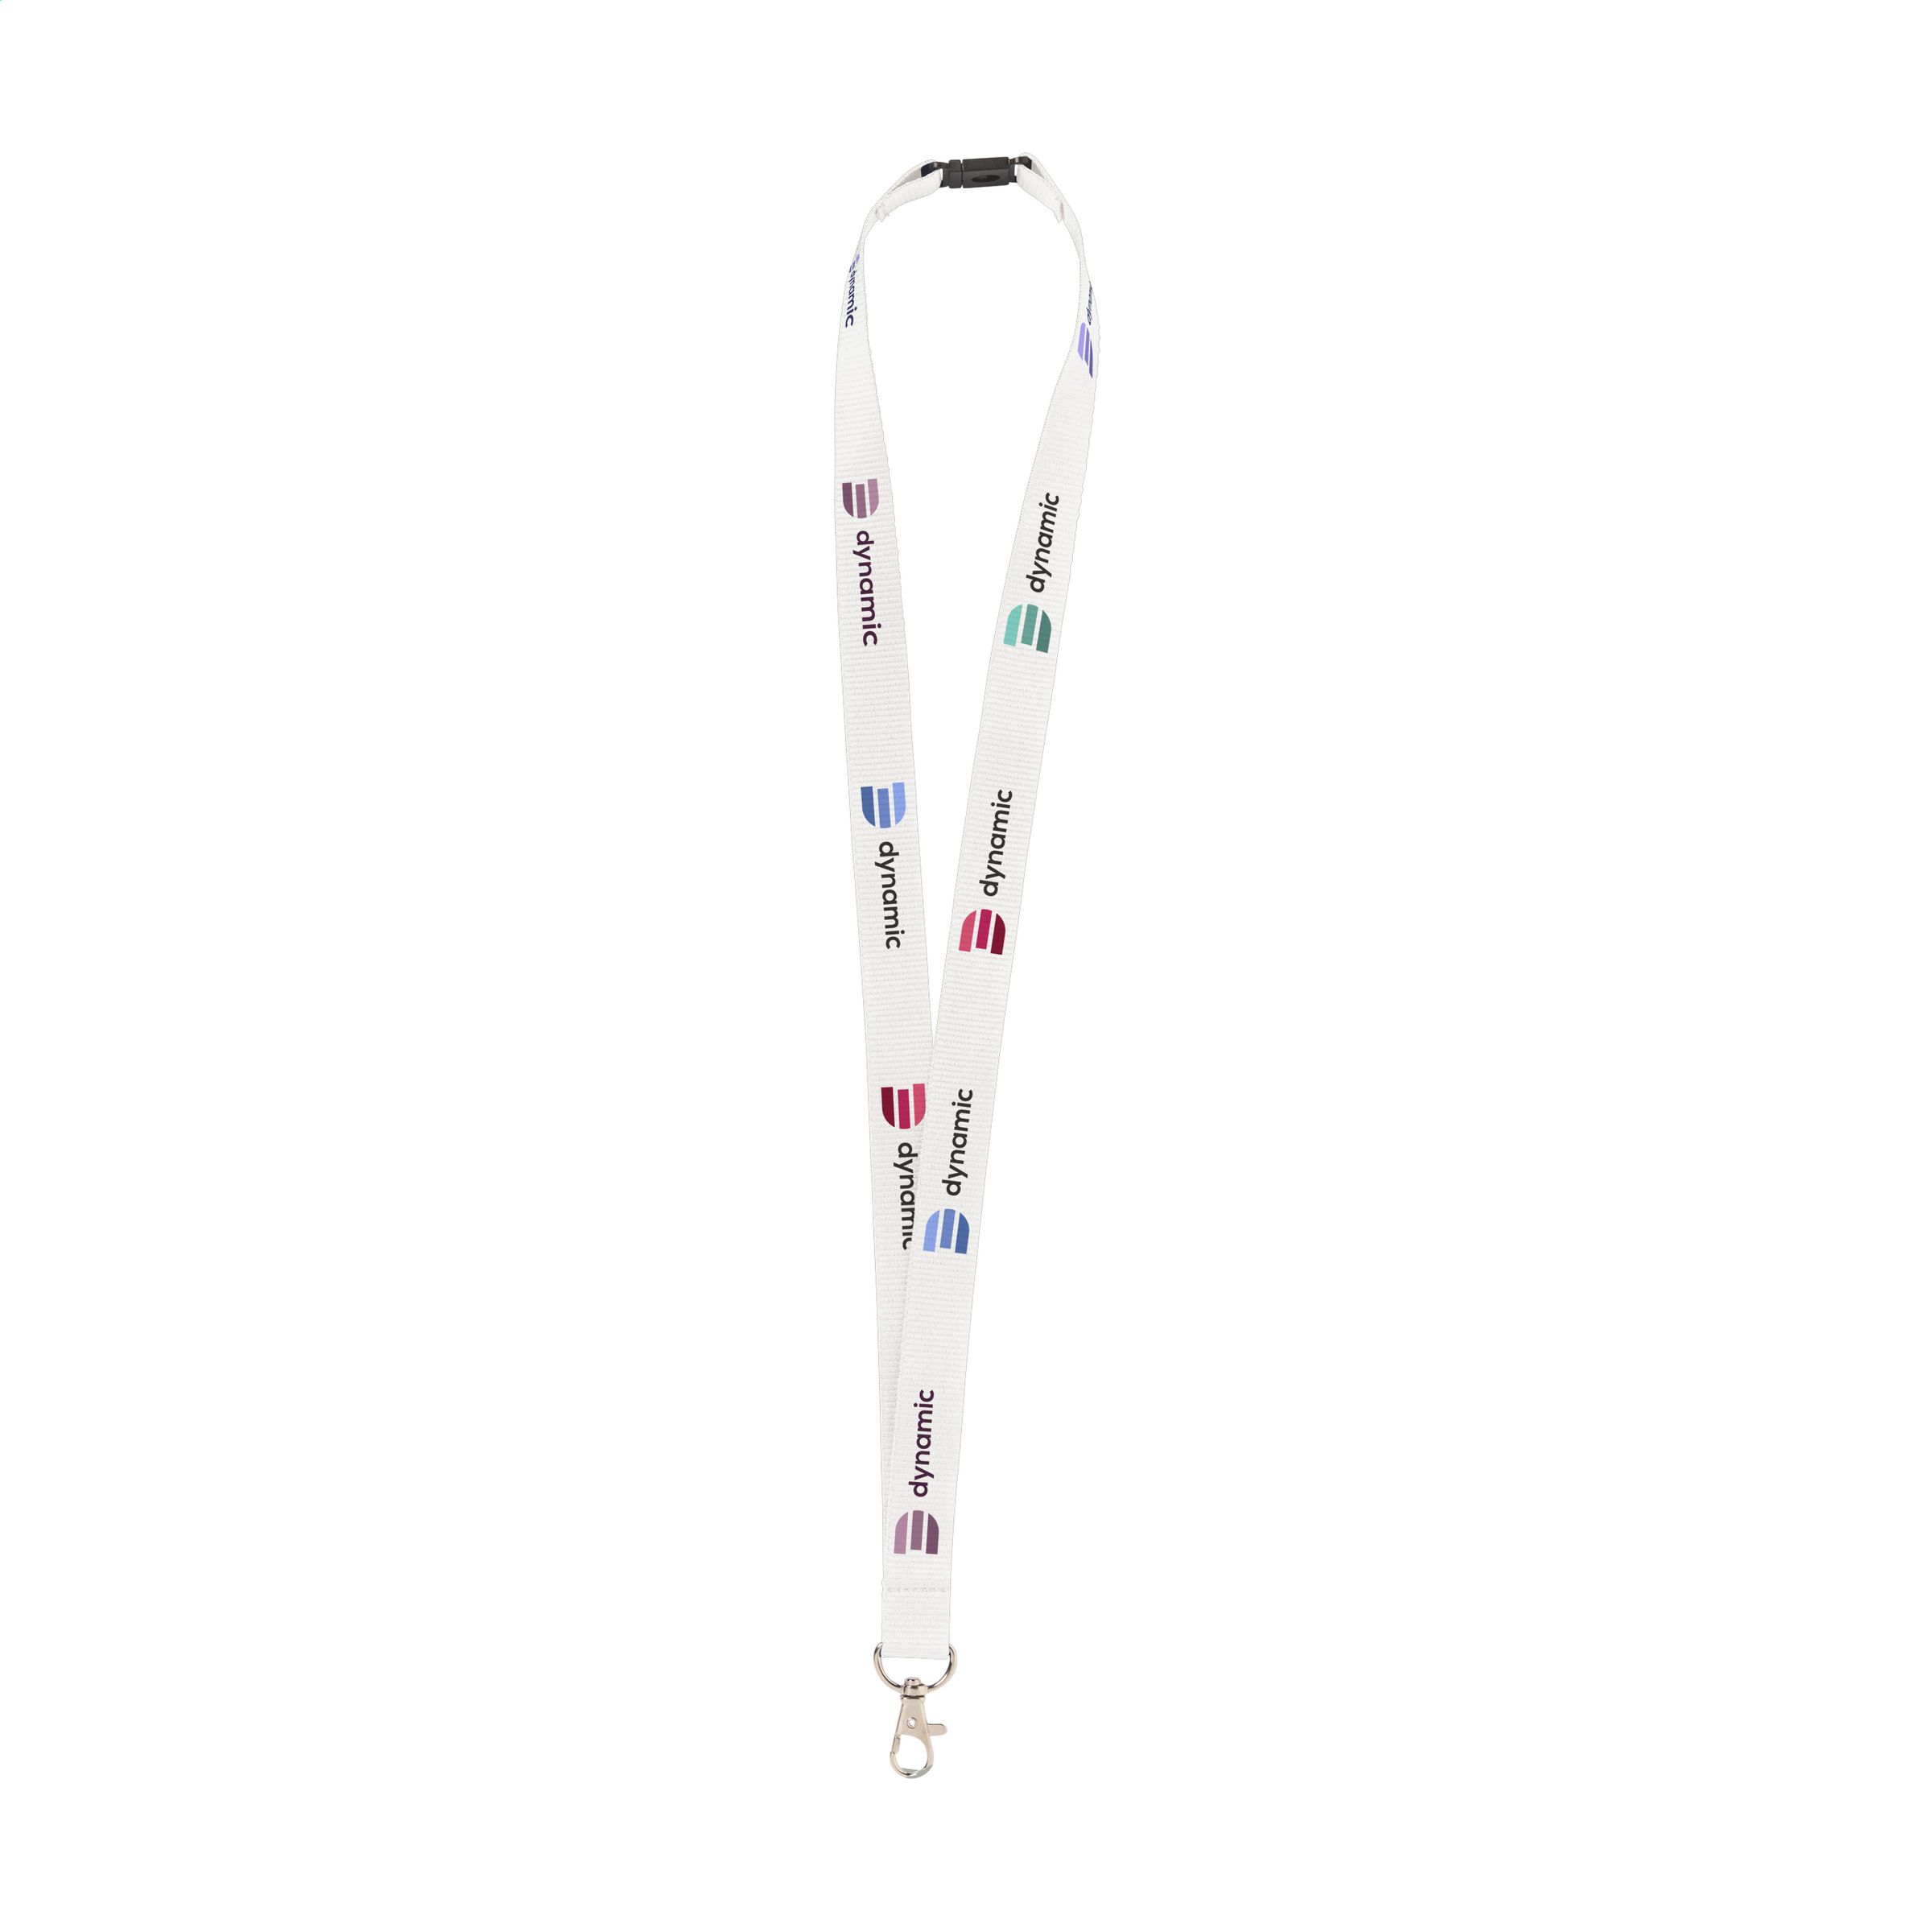 Polyester Lanyard made from Recycled PET Bottles with a Metal Carabiner - Swansea